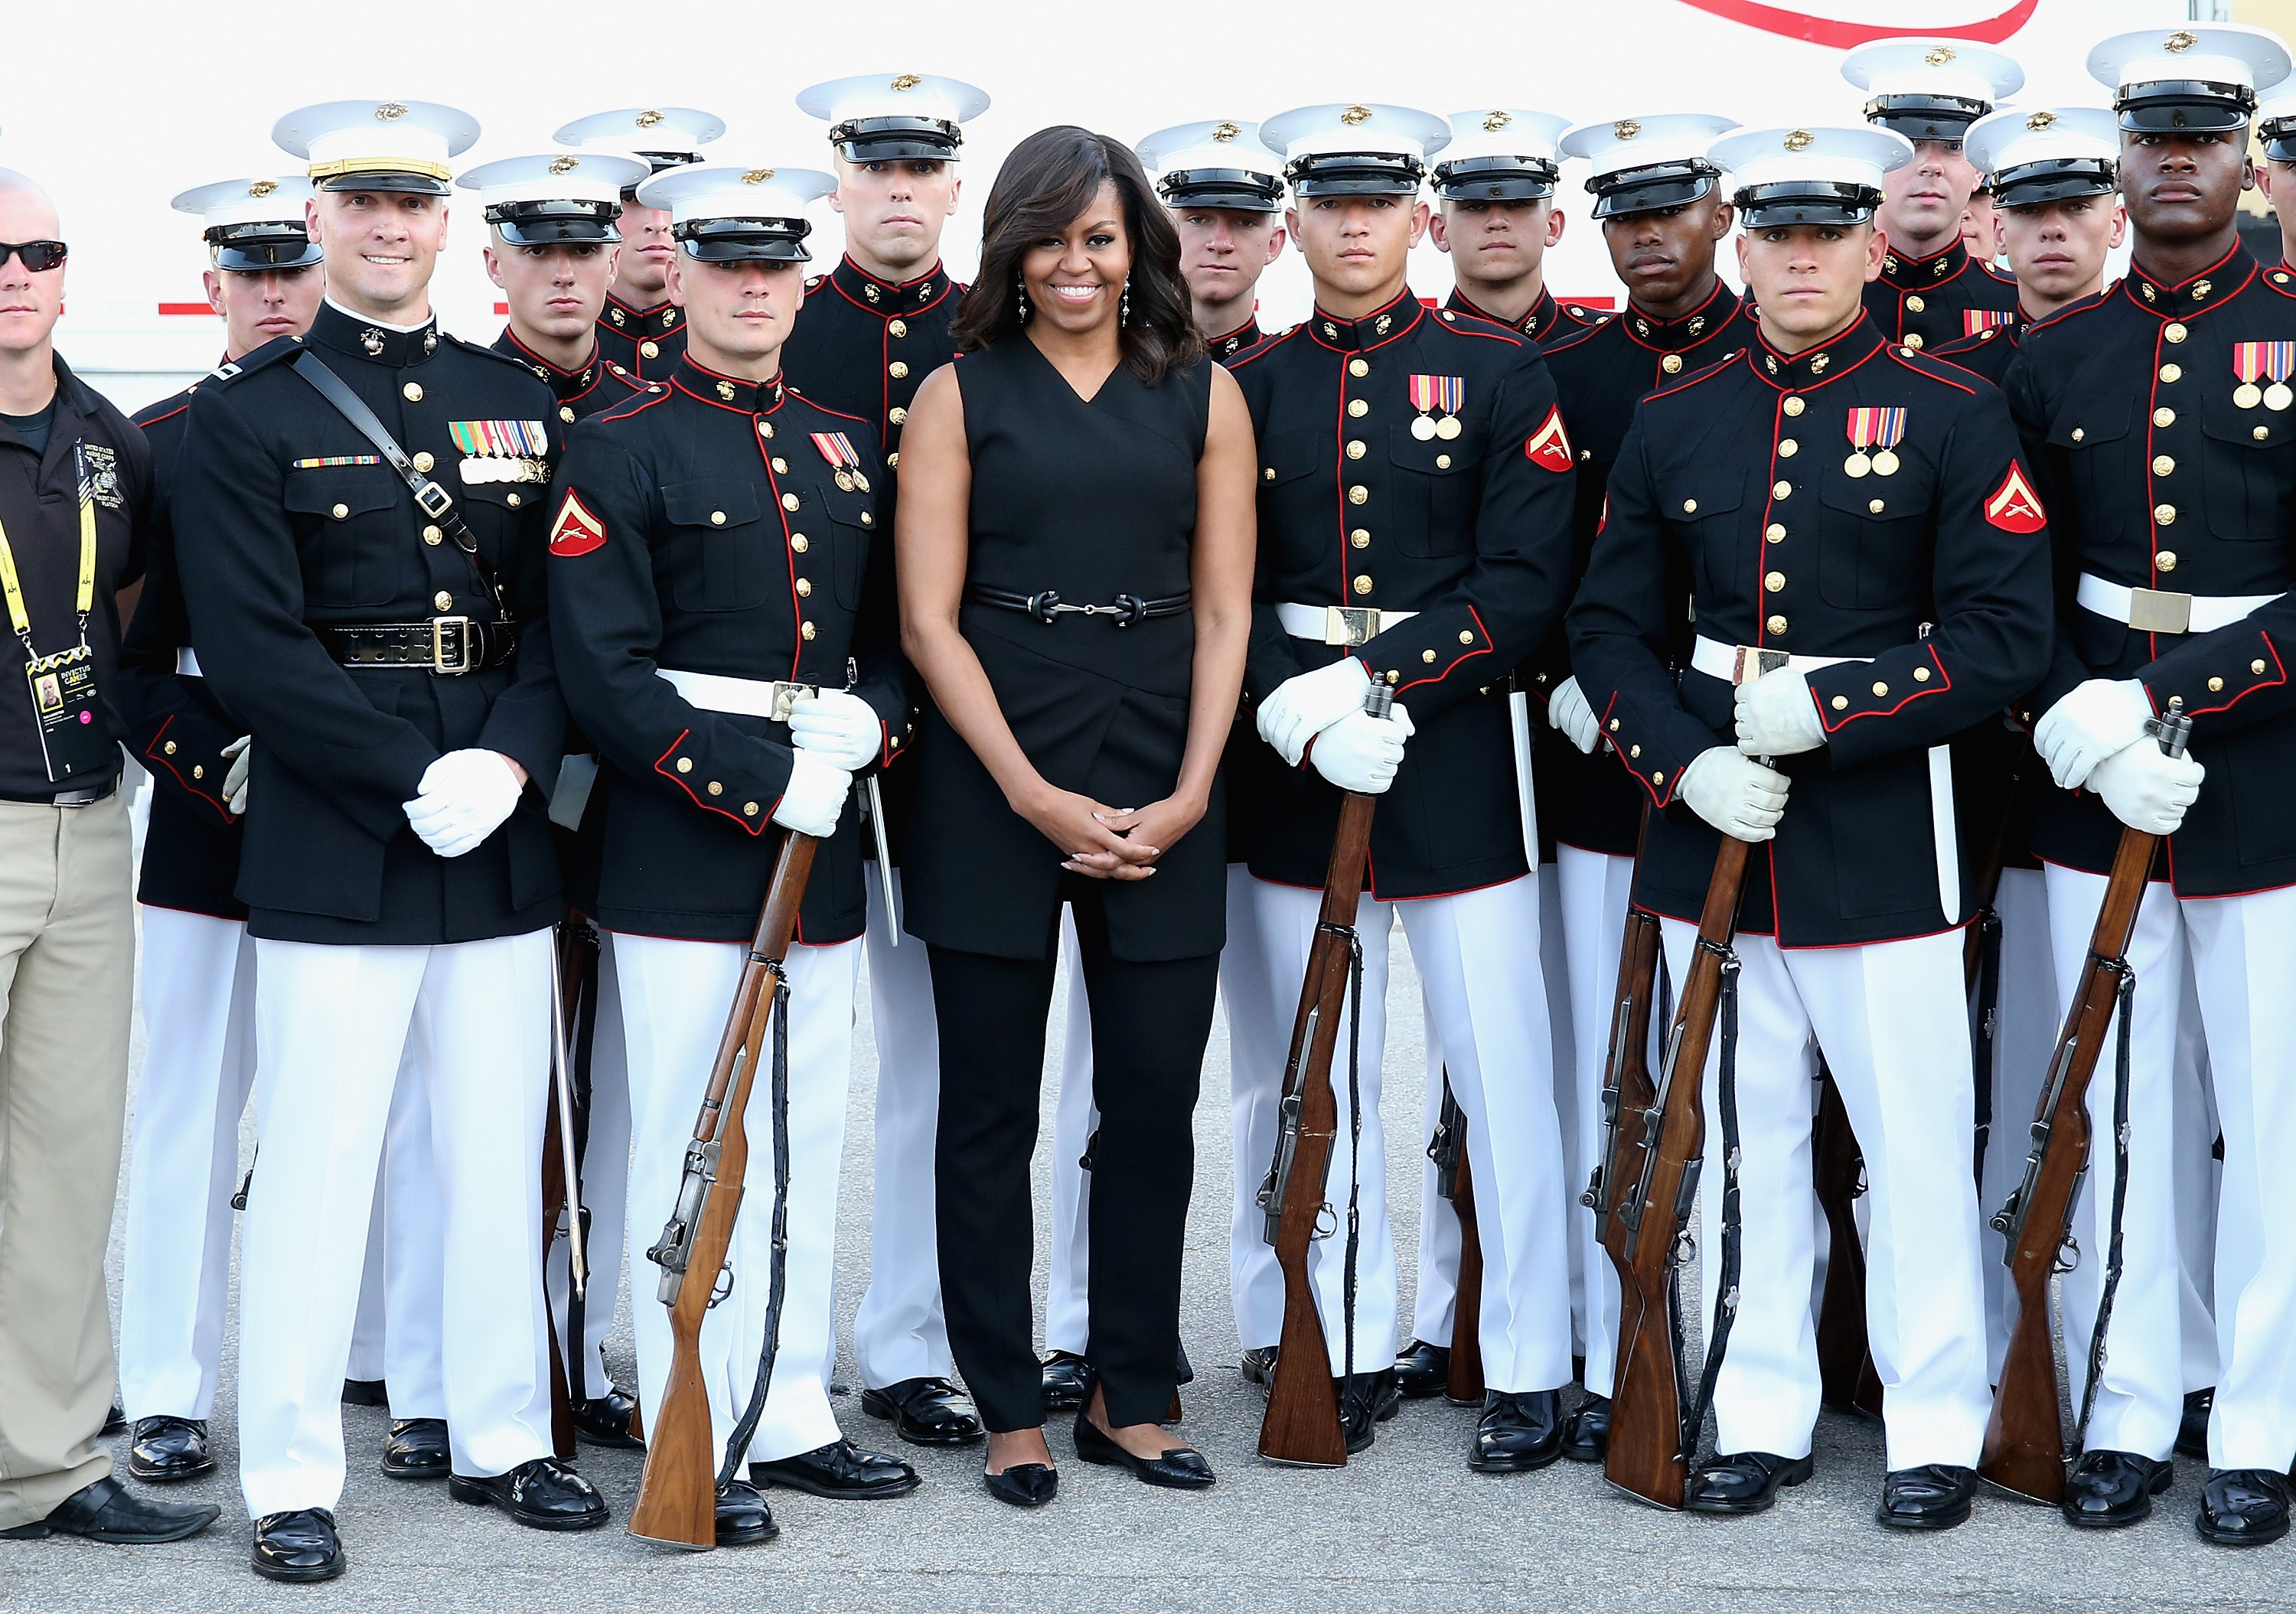 First Lady Michelle Obama poses with the U.S. Marine Corps Silent Drill Platoon ahead of the Opening Ceremony of the Invictus Games Orlando 2016 at ESPN Wide World of Sports on May 8, 2016 in Orlando, Florida. (Chris Jackson—Getty Images for Invictus)